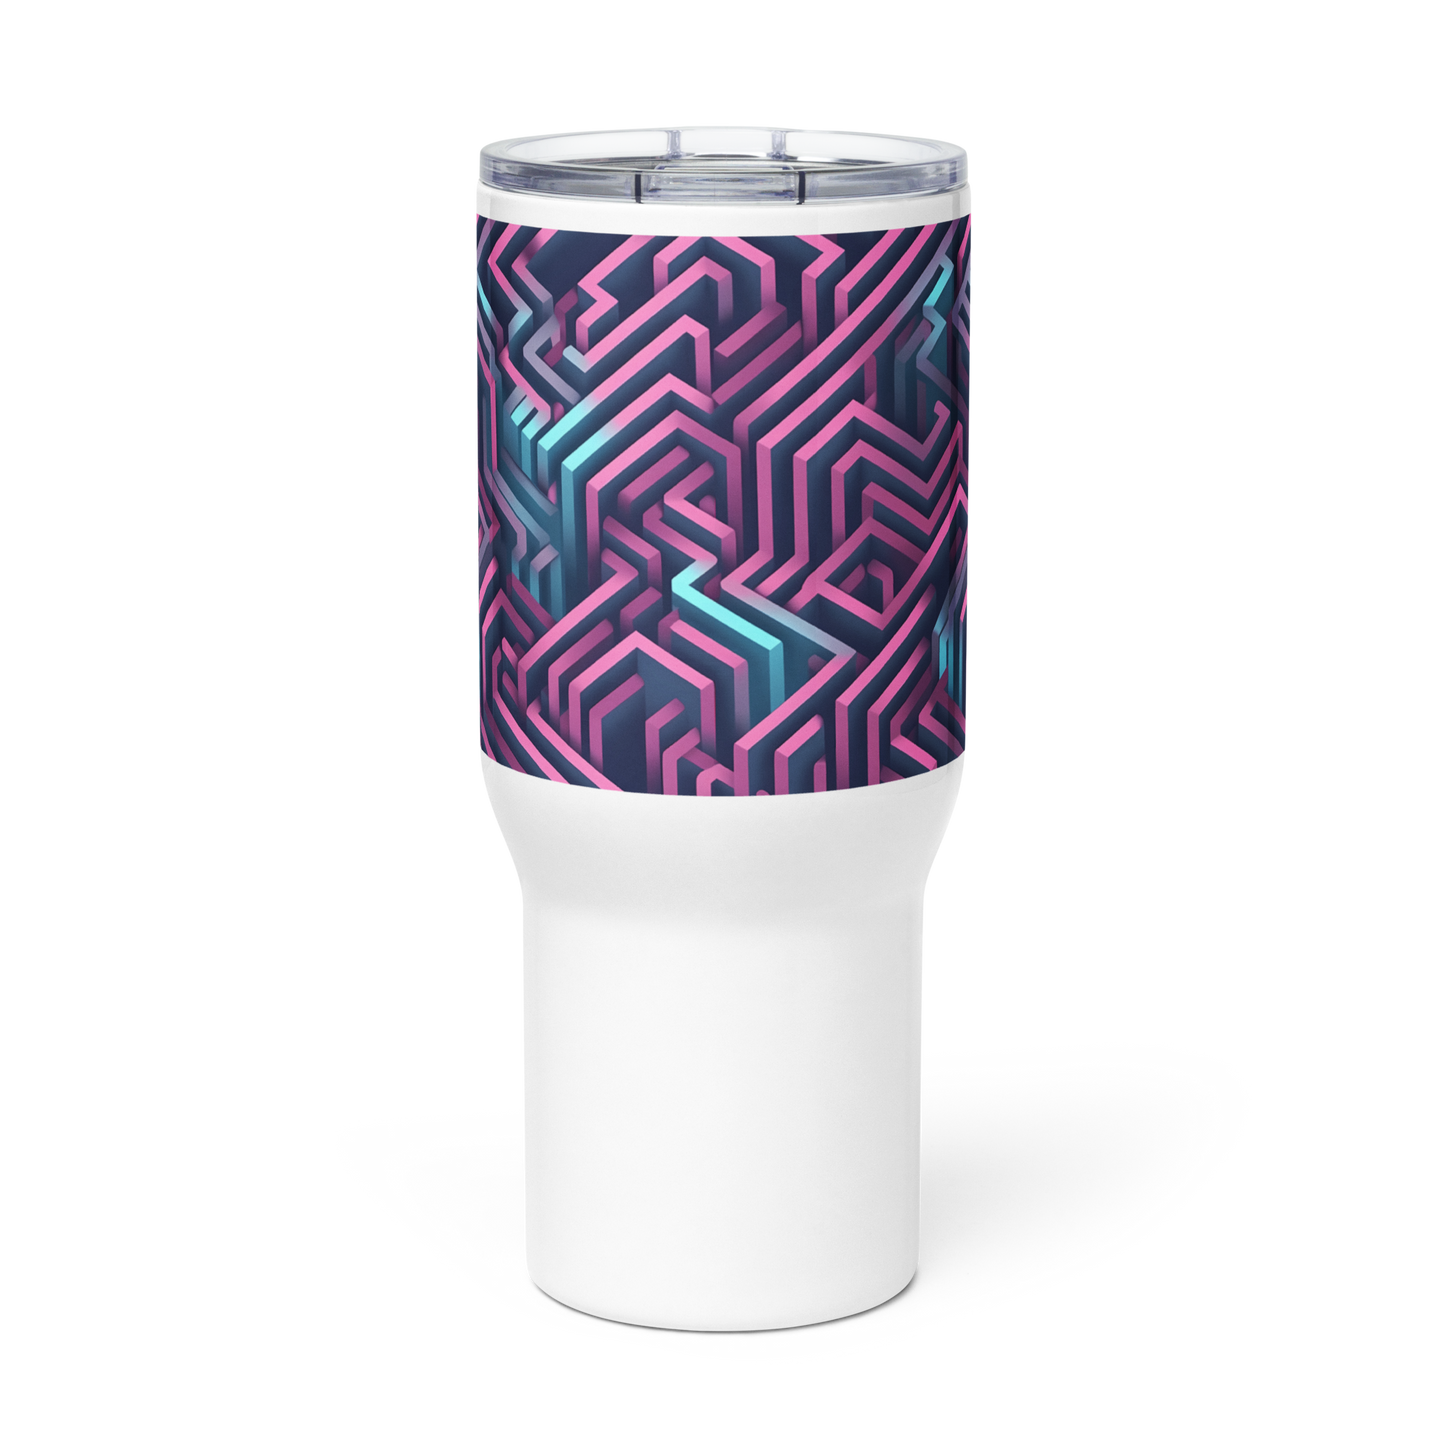 3D Maze Illusion | 3D Patterns | Travel Mug with a Handle - #4